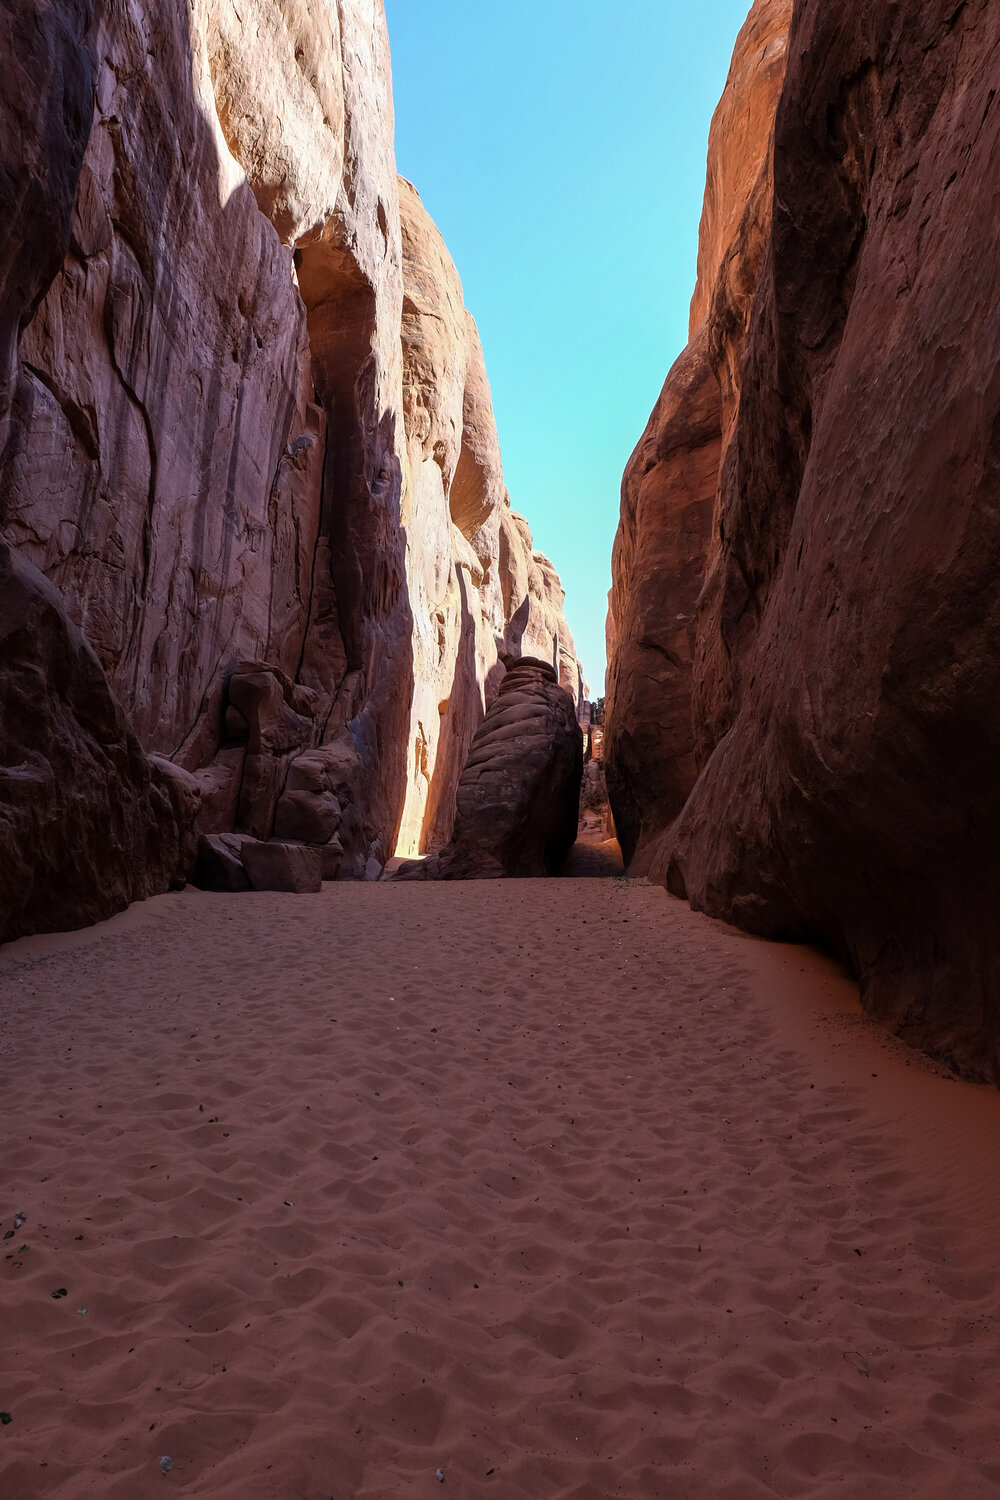 The Trail to Sand Dune Arch